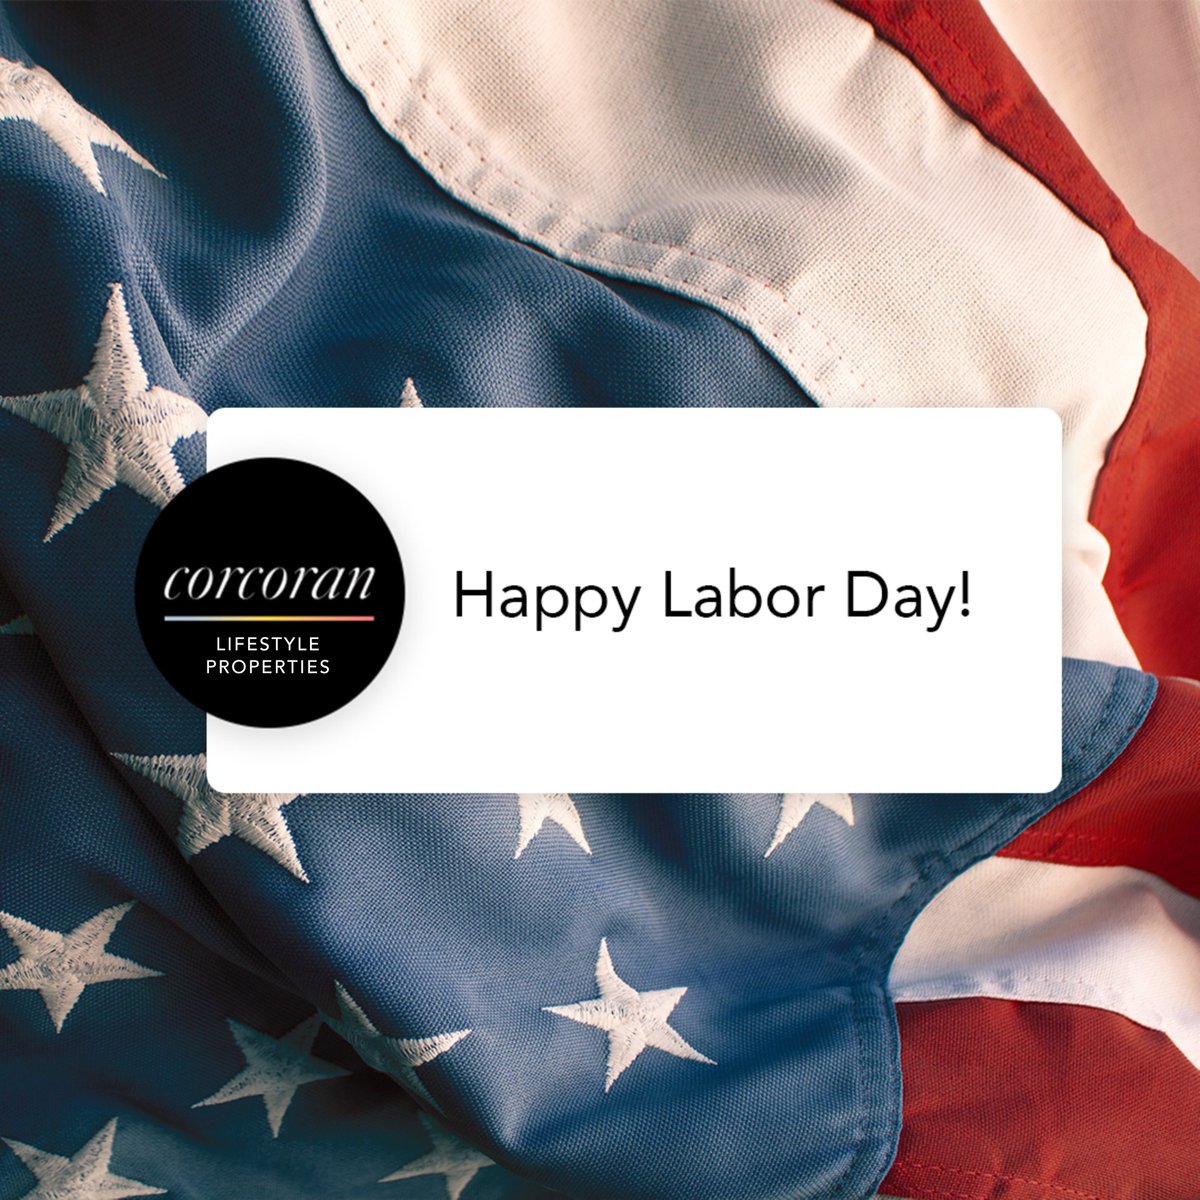 Happy Labor Day! Today we celebrate the hardworking individuals who keep our country moving forward.

#wa
#LaborDay #thecorcorangroup #corcoran #corcoranlifestyleproperties #washington #greaterseattlearea #greaterseattleliving #realestate